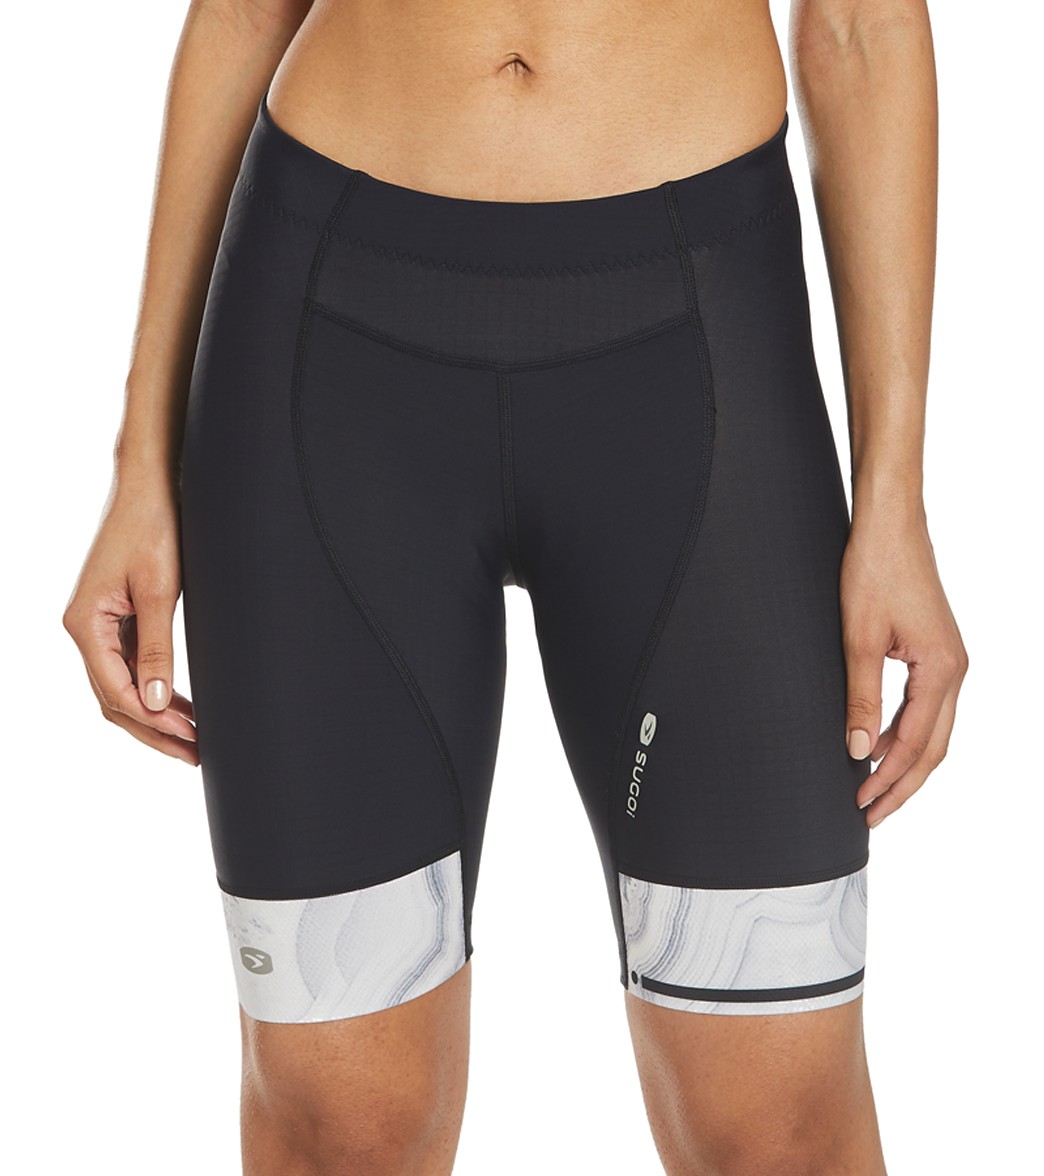 Sugoi Women's Evolution Cycling Short at SwimOutlet.com - Free Shipping